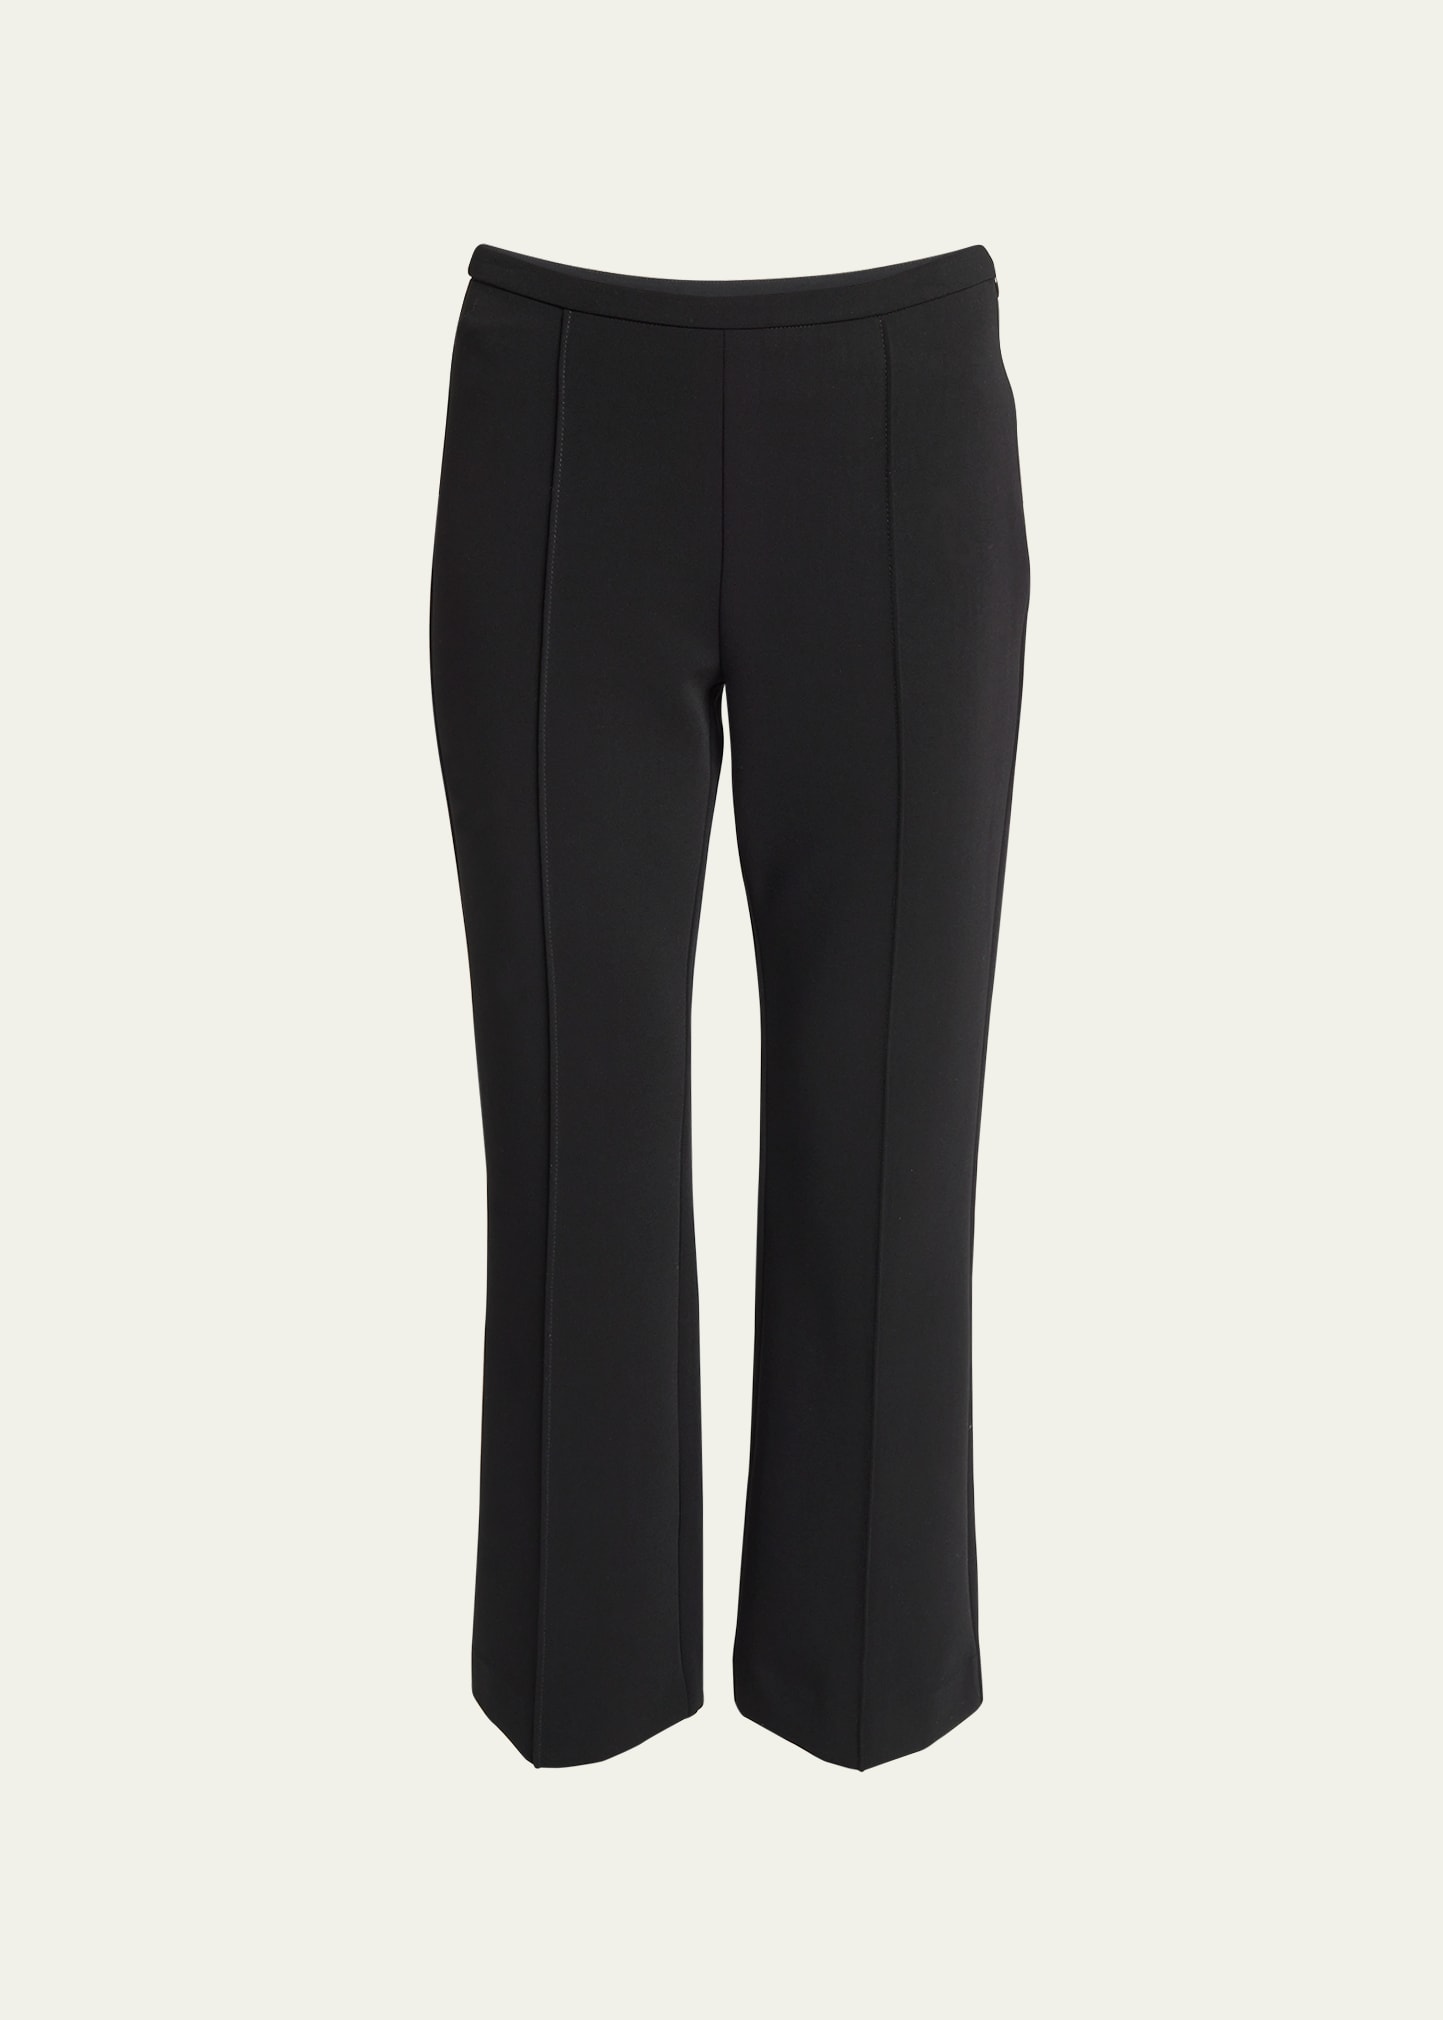 Proenza Schouler White Label Marta Knit Cropped Pull-on Pants In Black